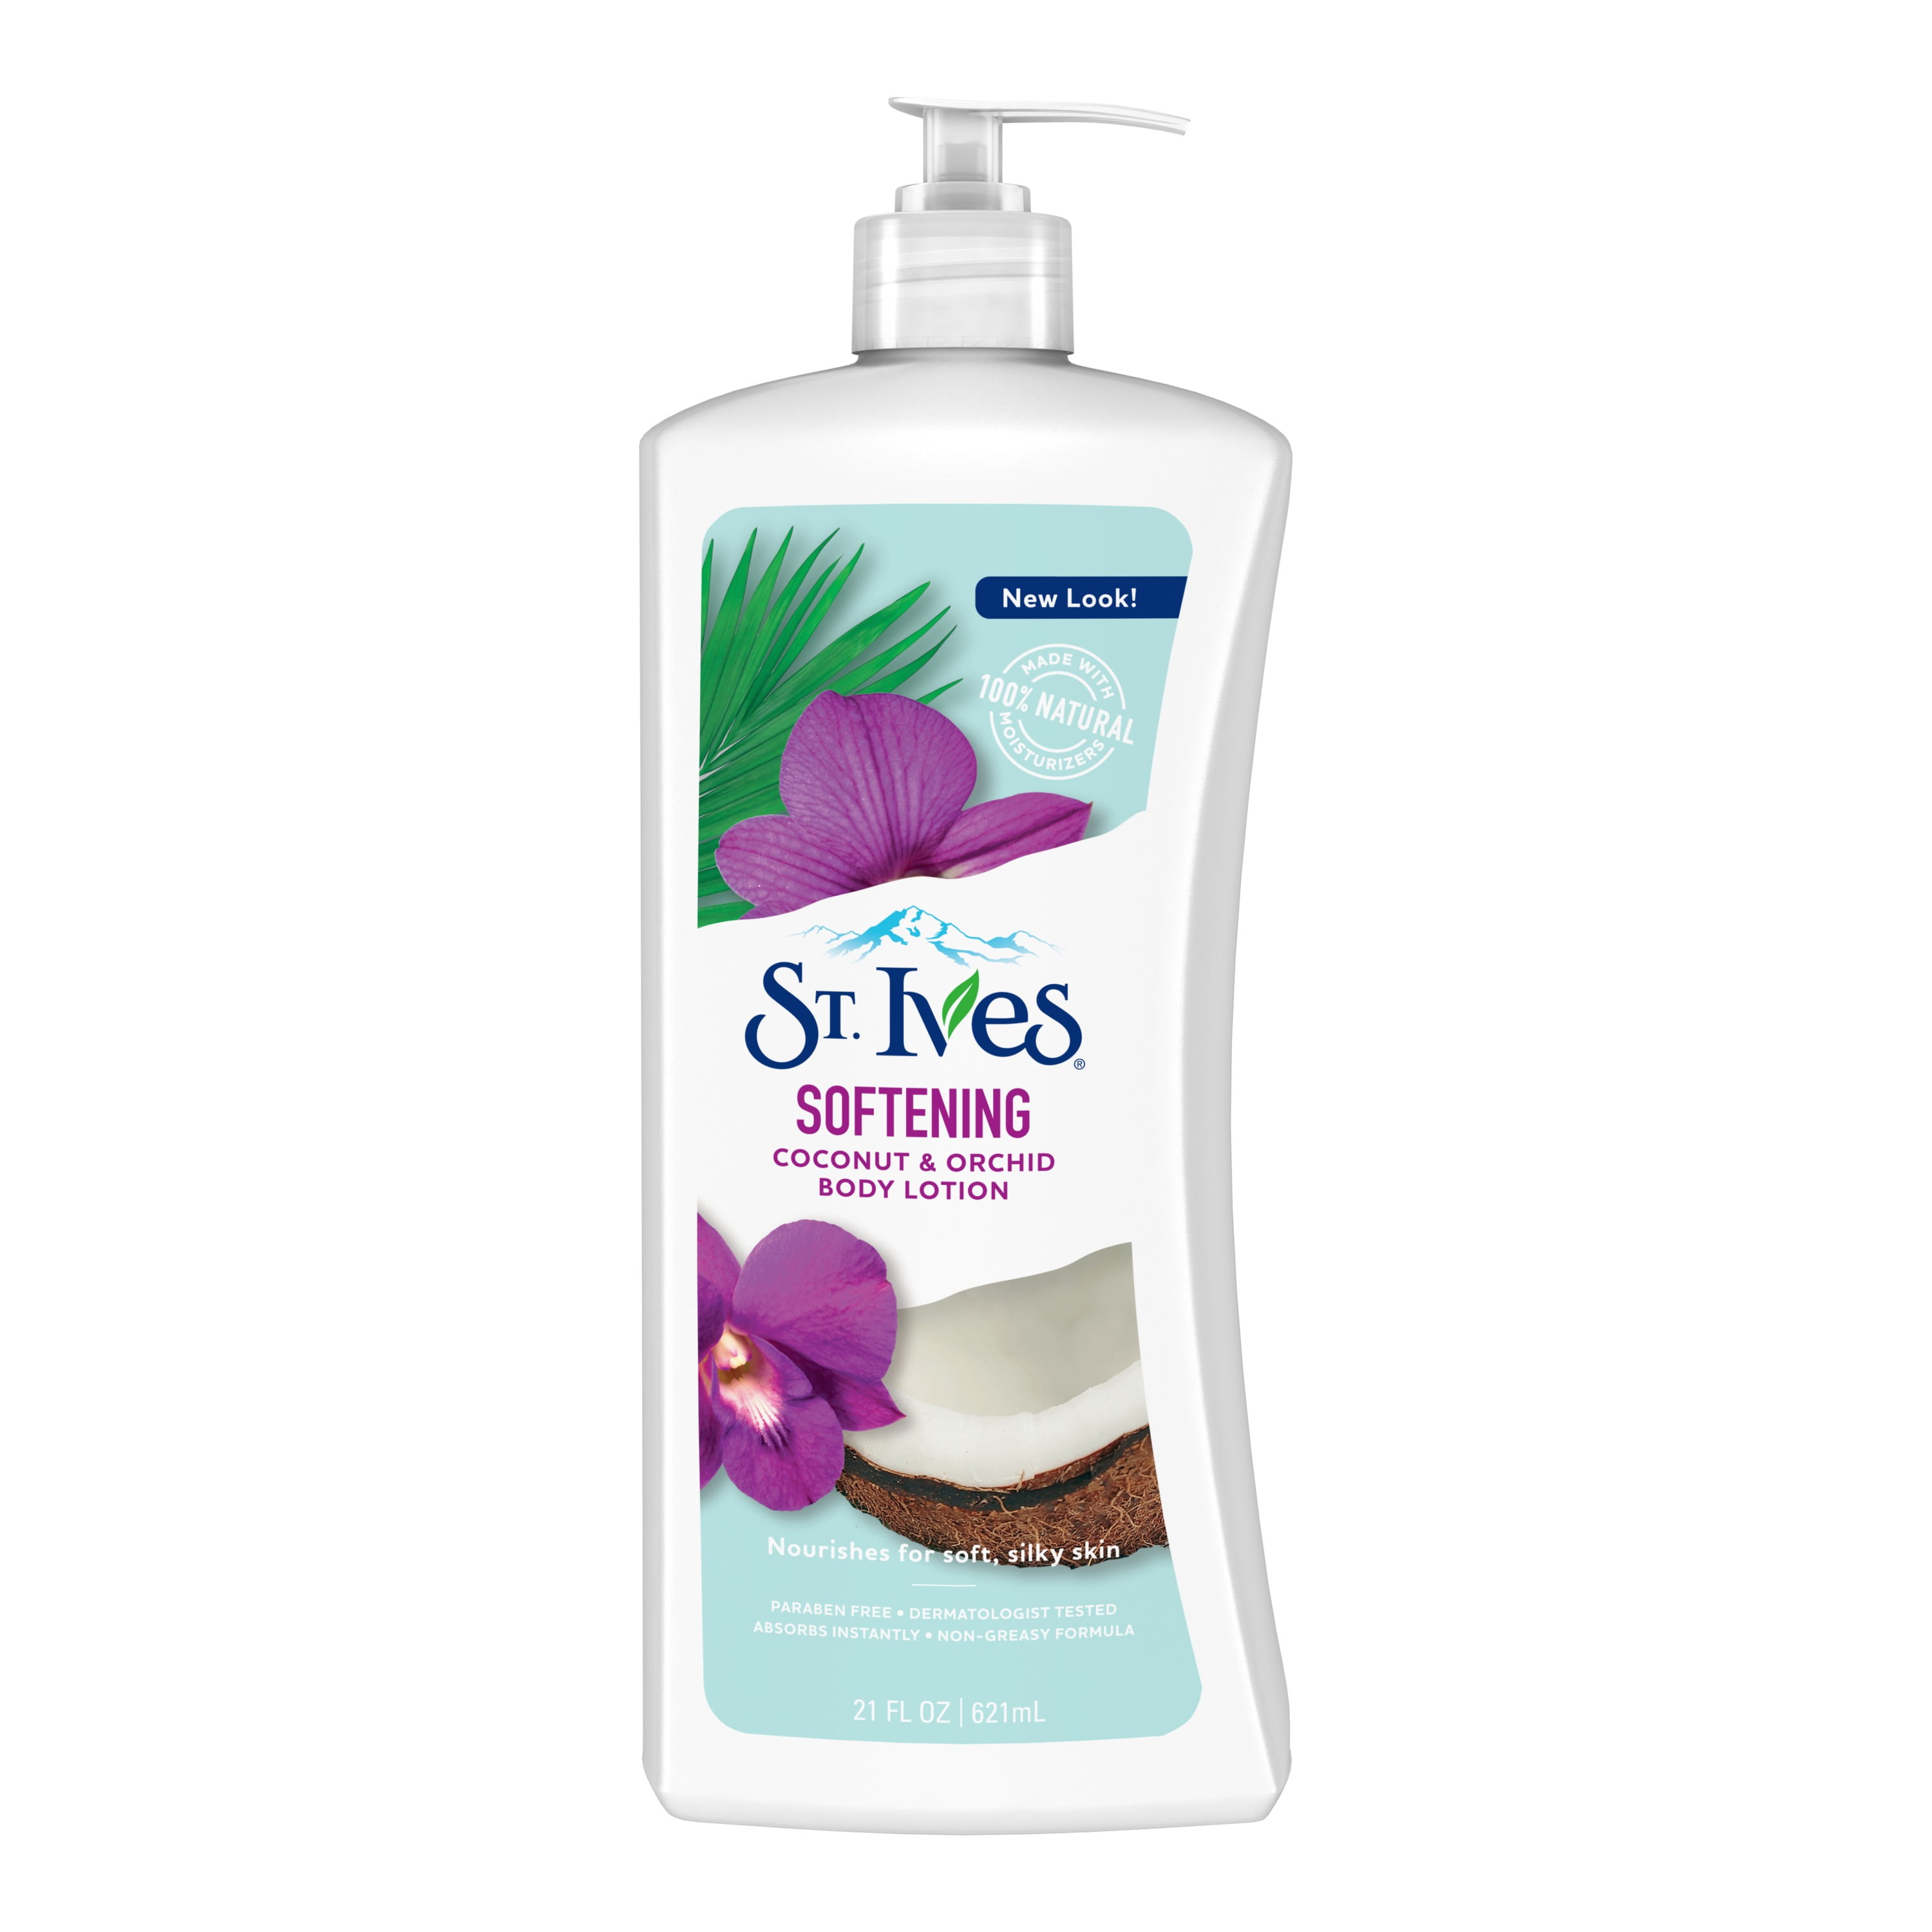 band Reserveren boom St. Ives Softening Body Lotion Coconut and Orchid 21 oz - Walmart.com